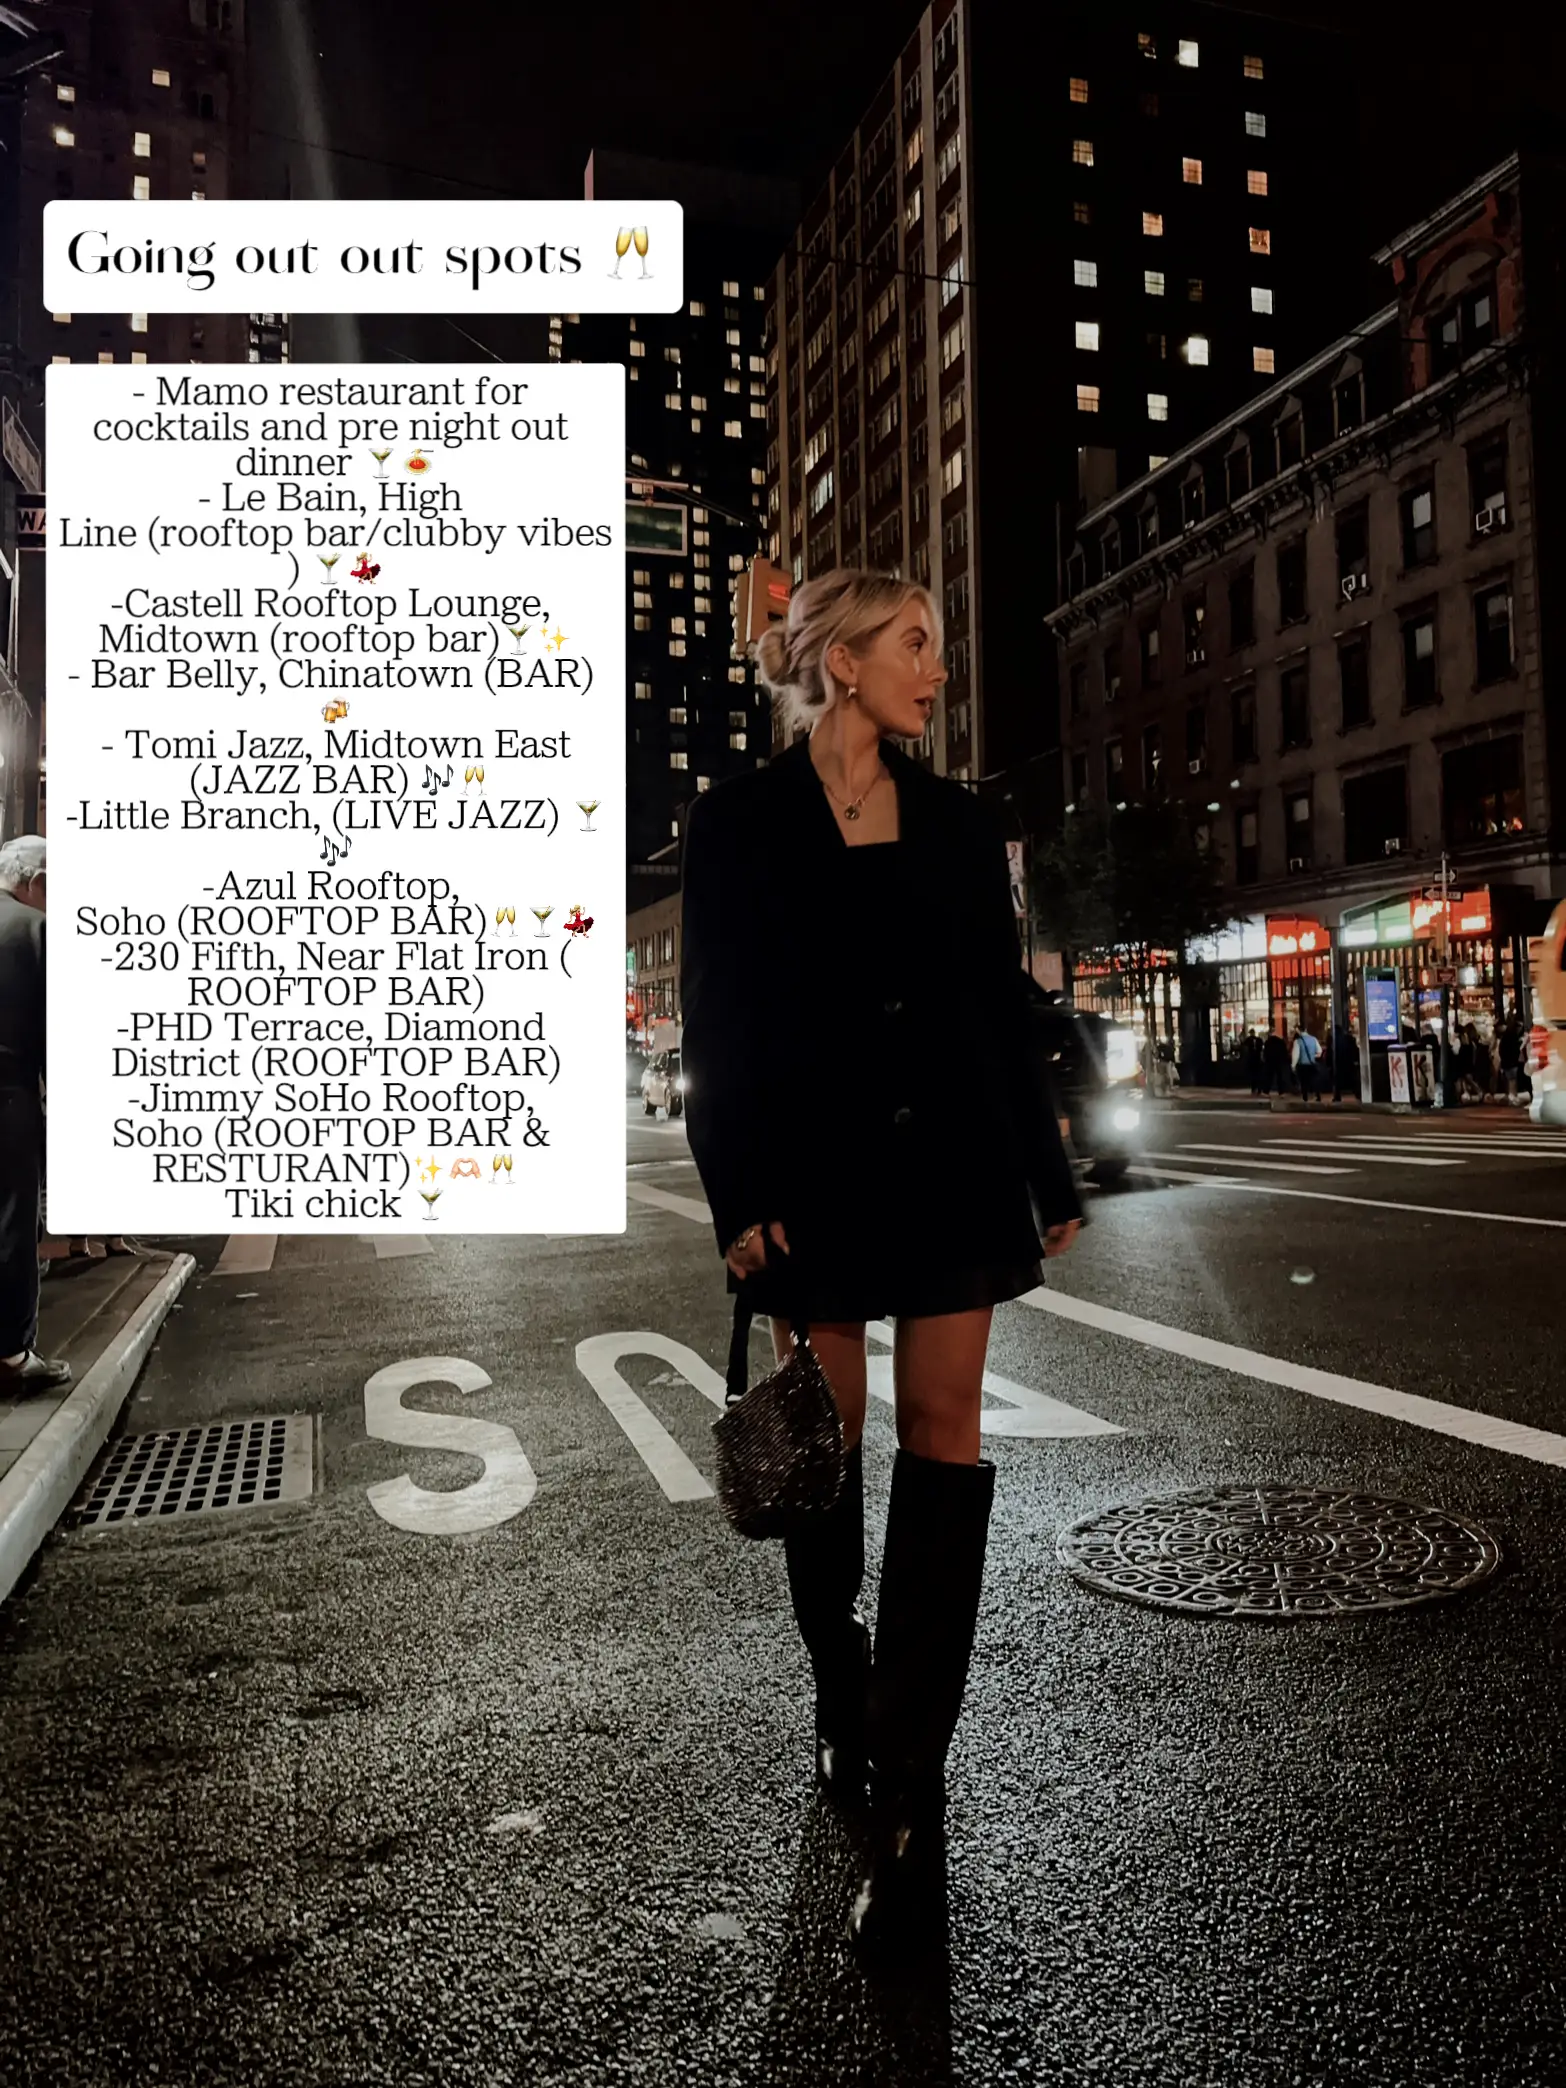  A woman is walking down a sidewalk in front of a sign that says "Going out spots". She is wearing a black jacket and is holding a purse. The sign also has a list of restaurants and bars on it.